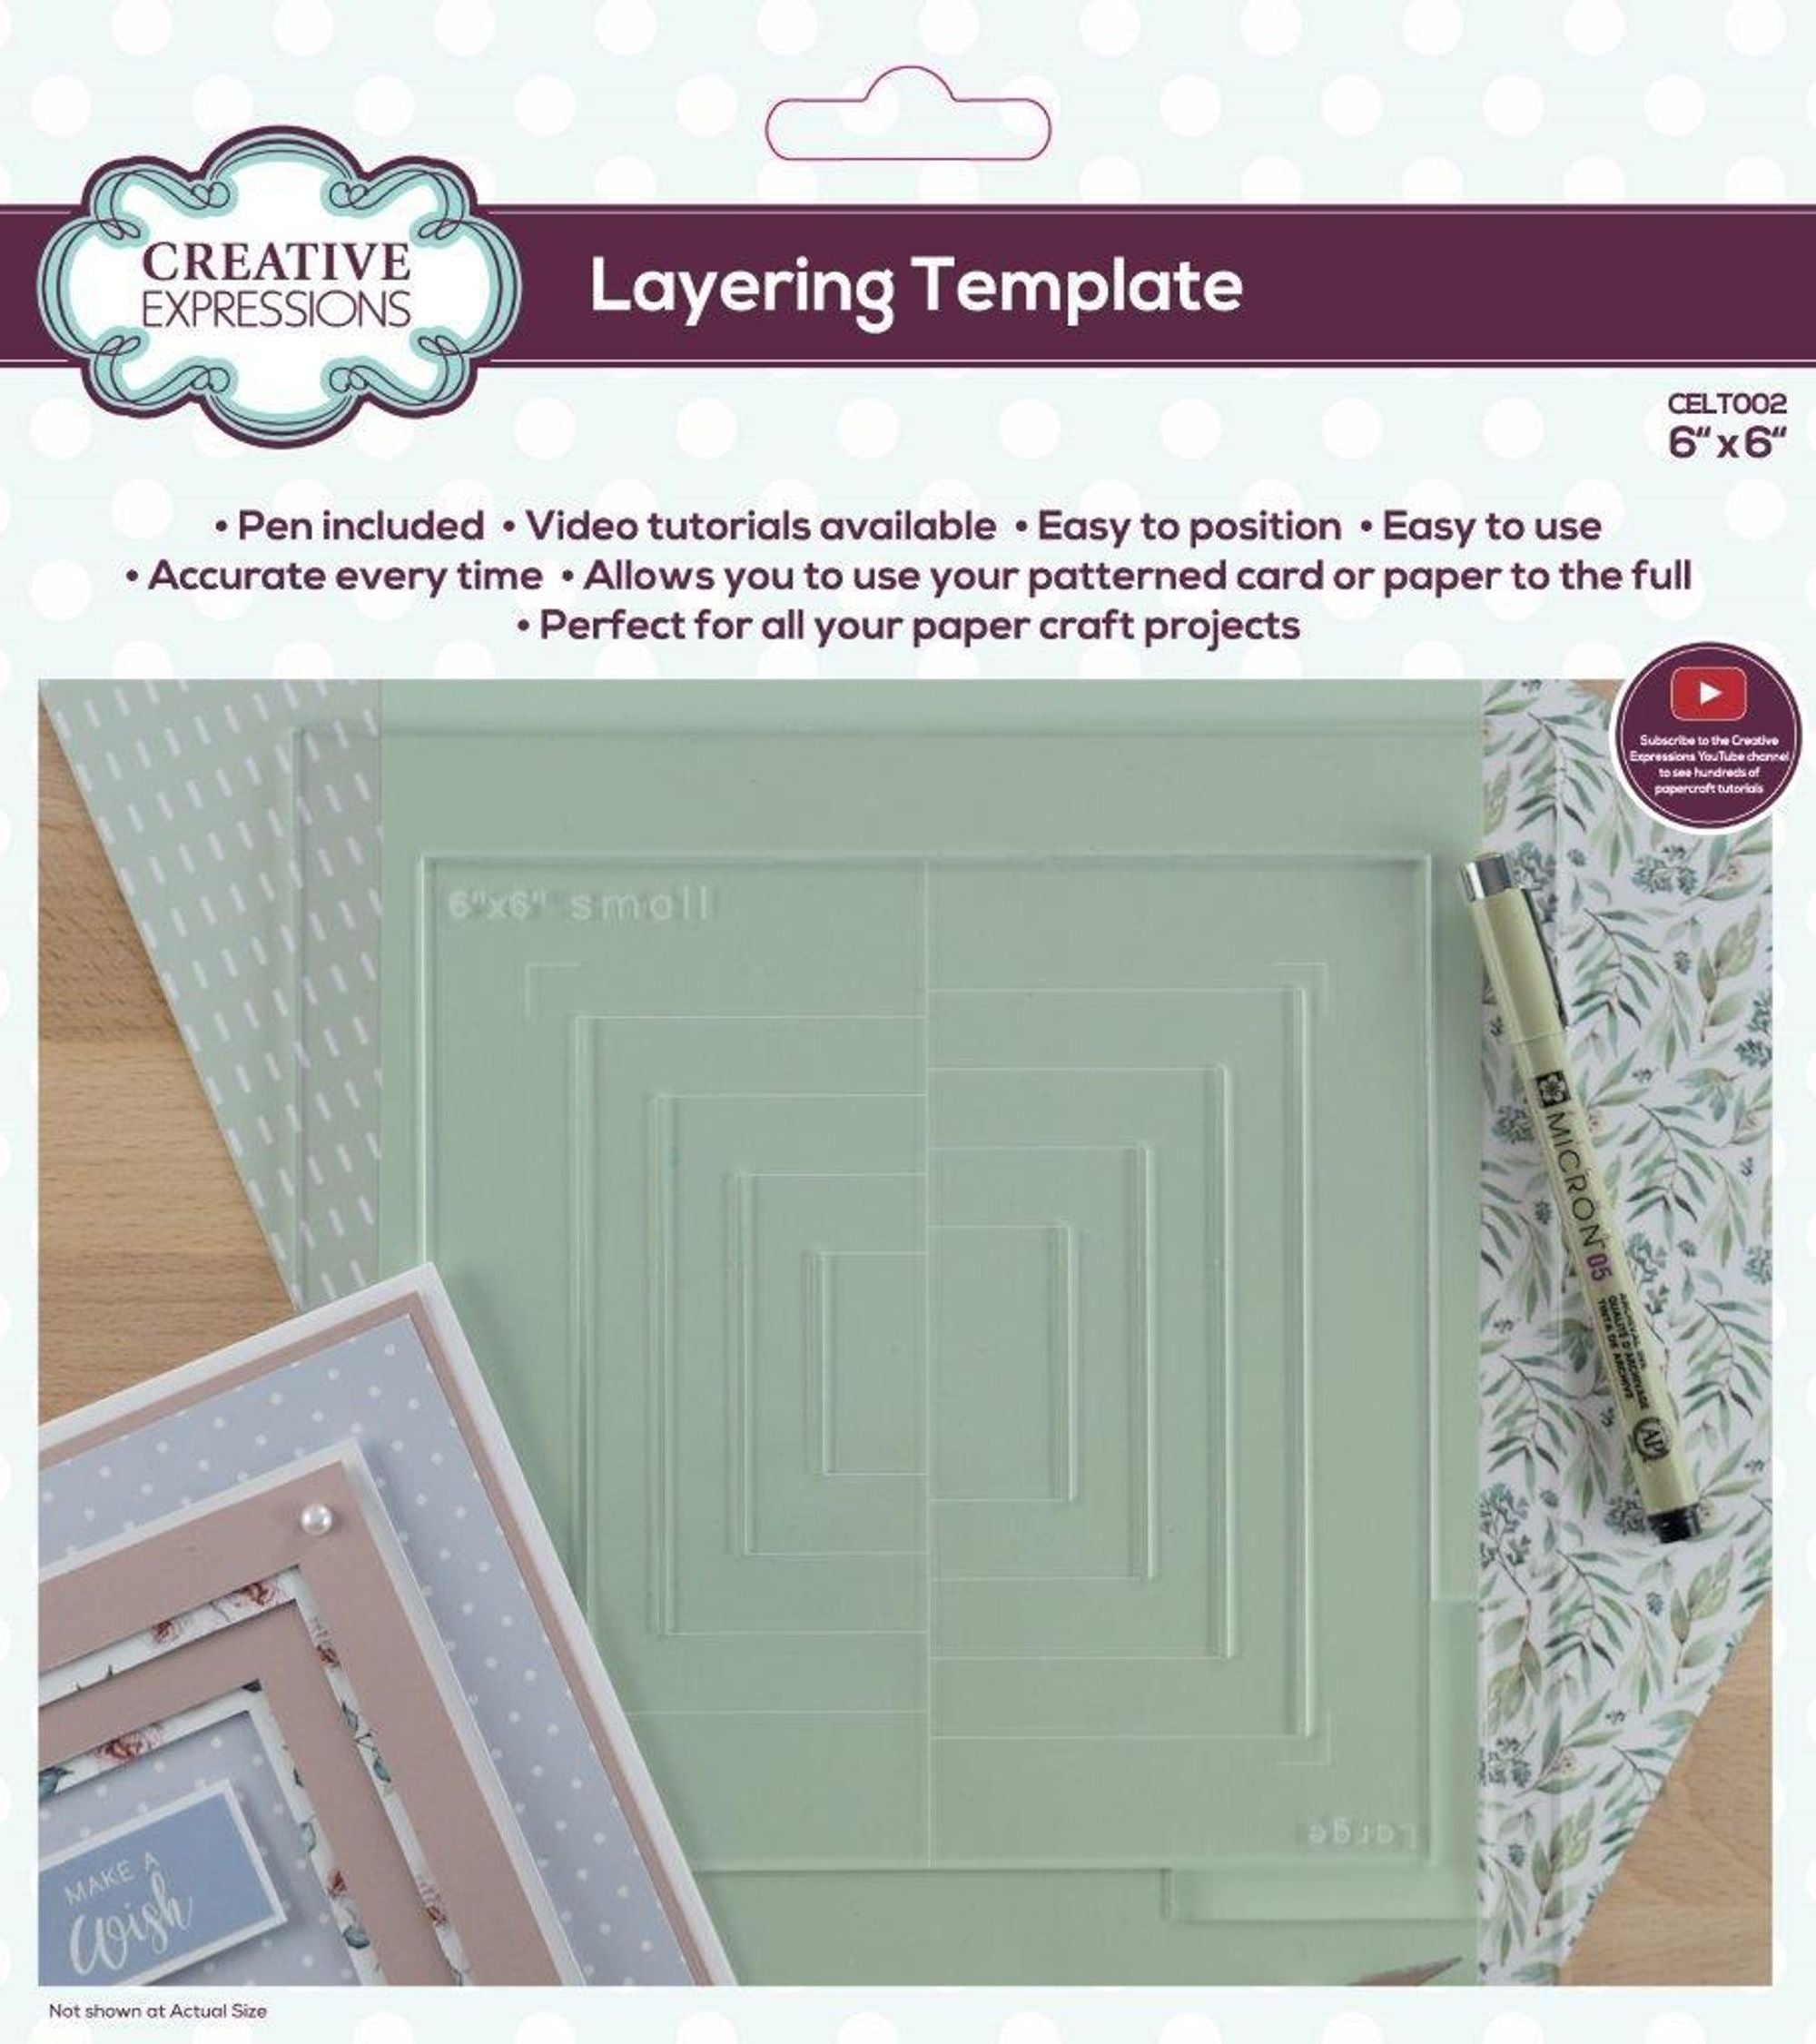 Layering Template 6 in x 6 in